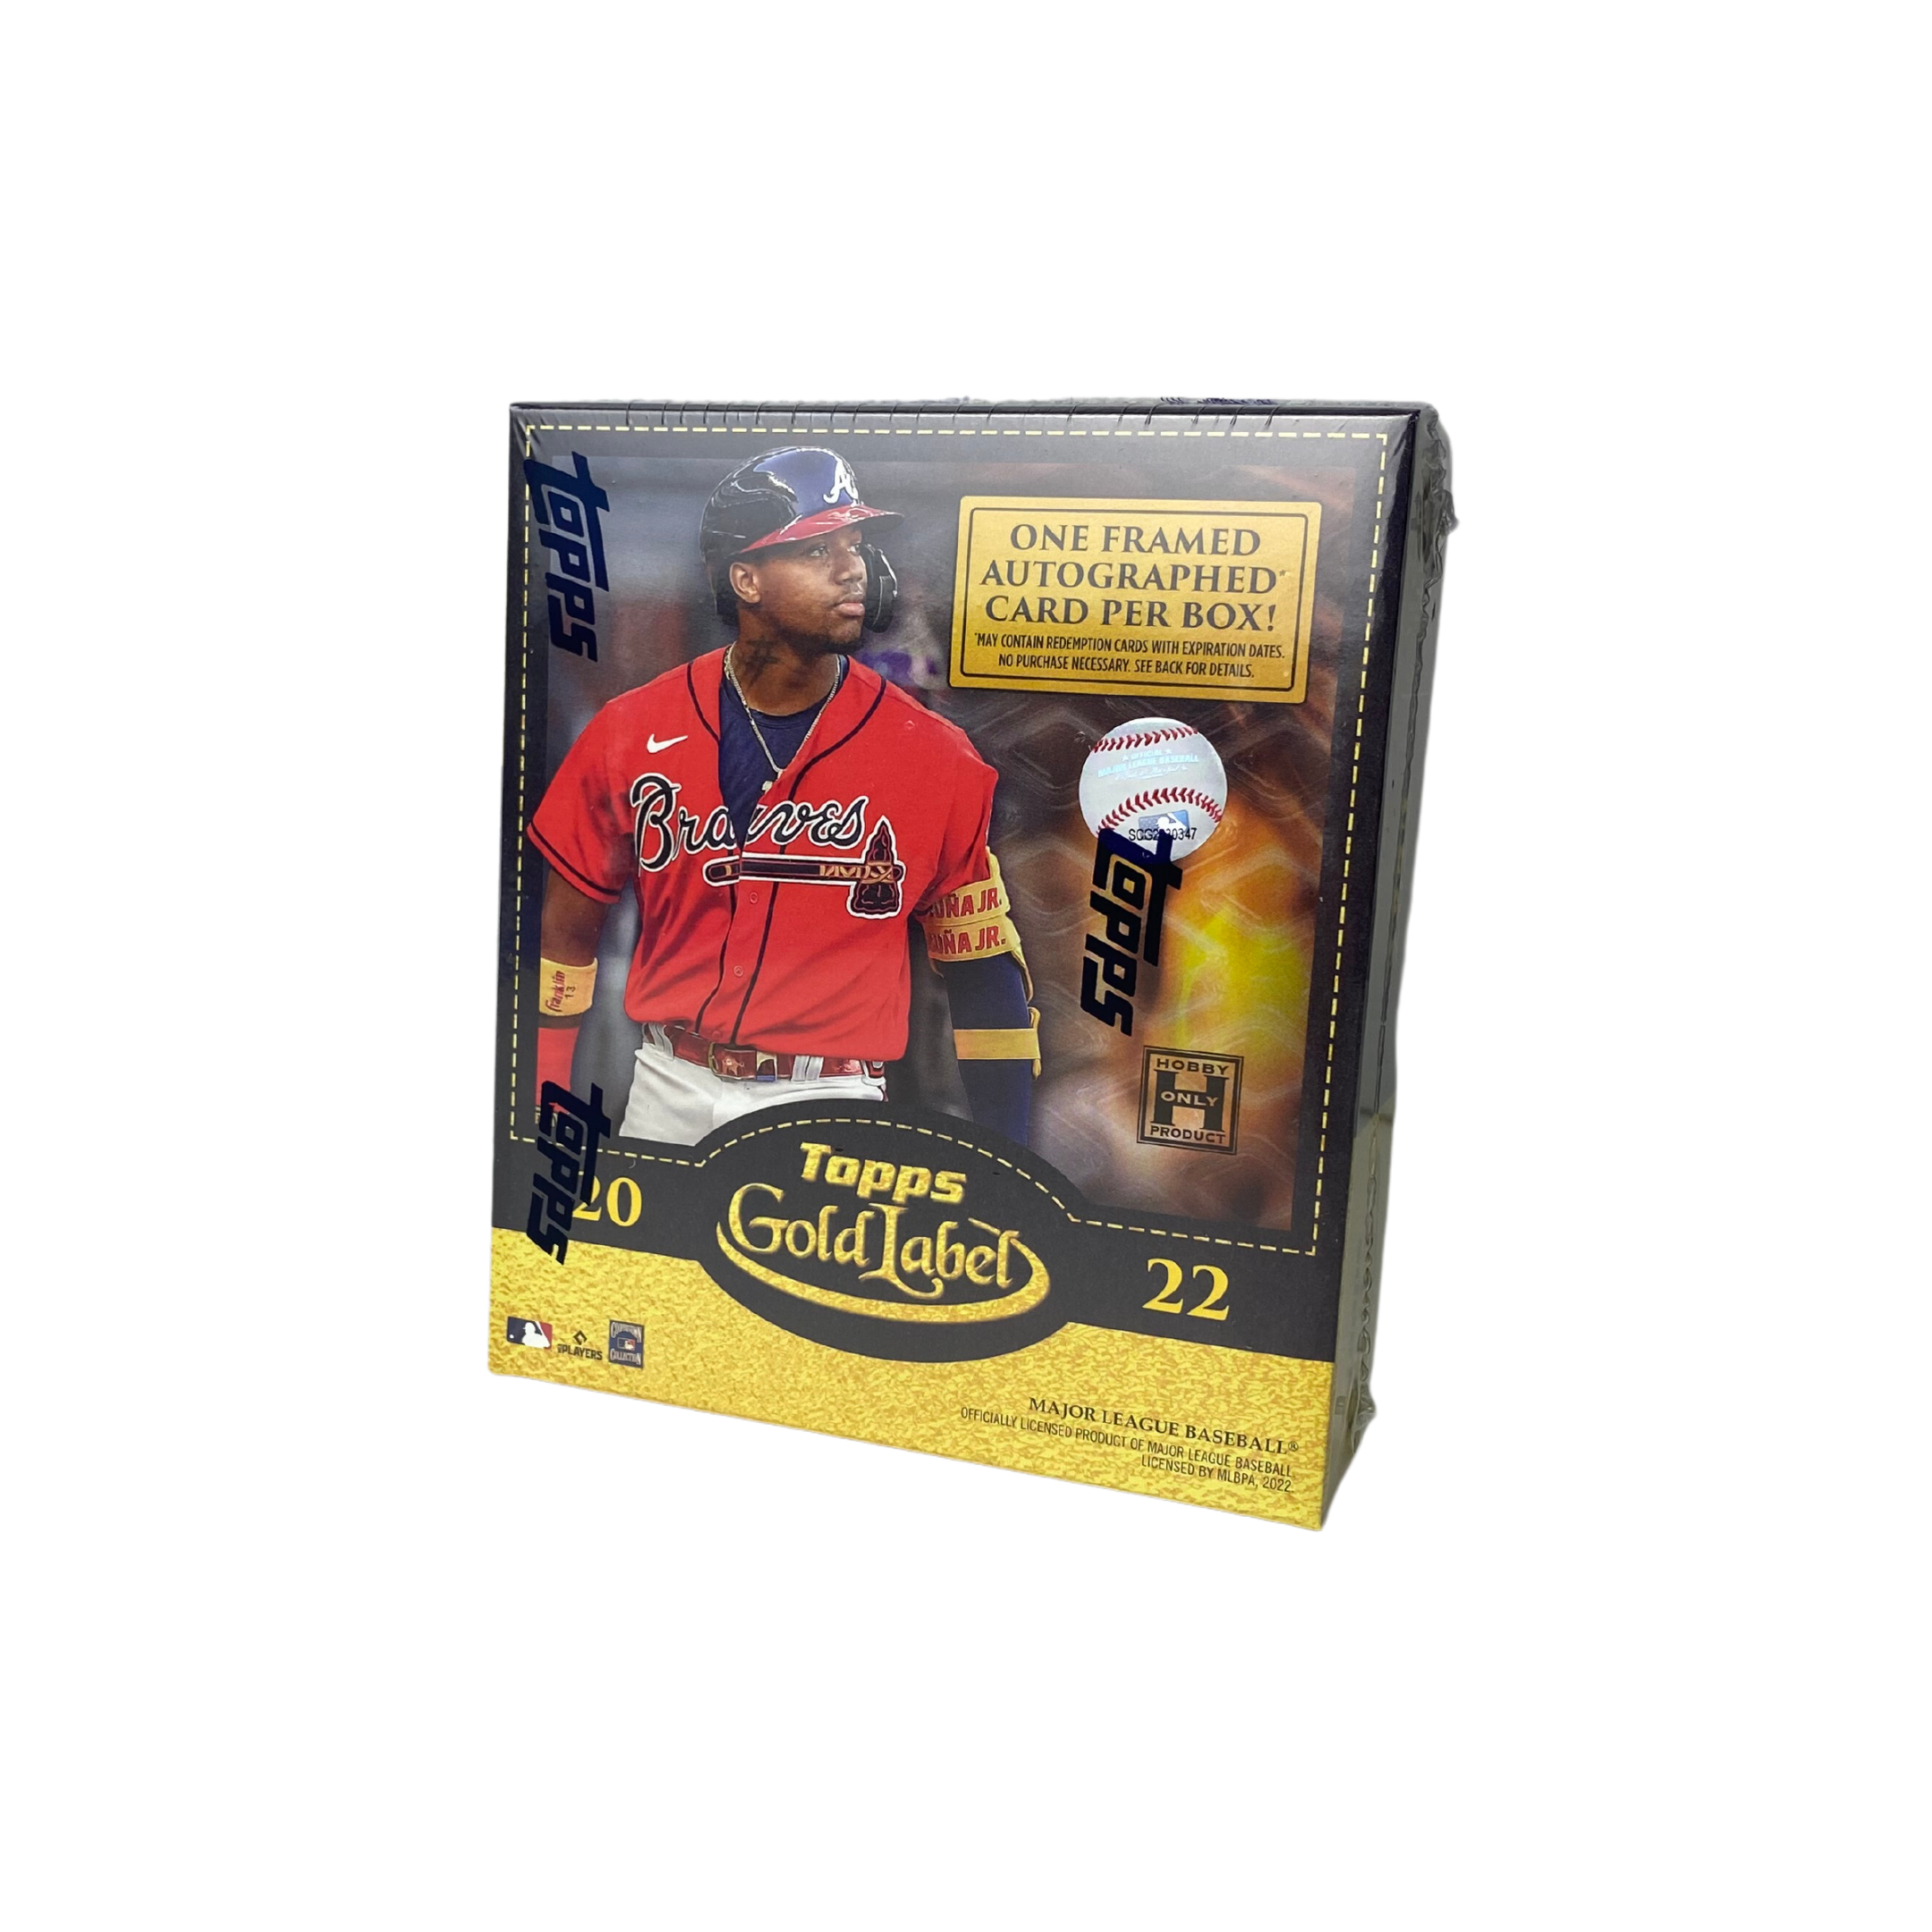 2021 Topps Gold Label Hobby Box - New Release!!! 